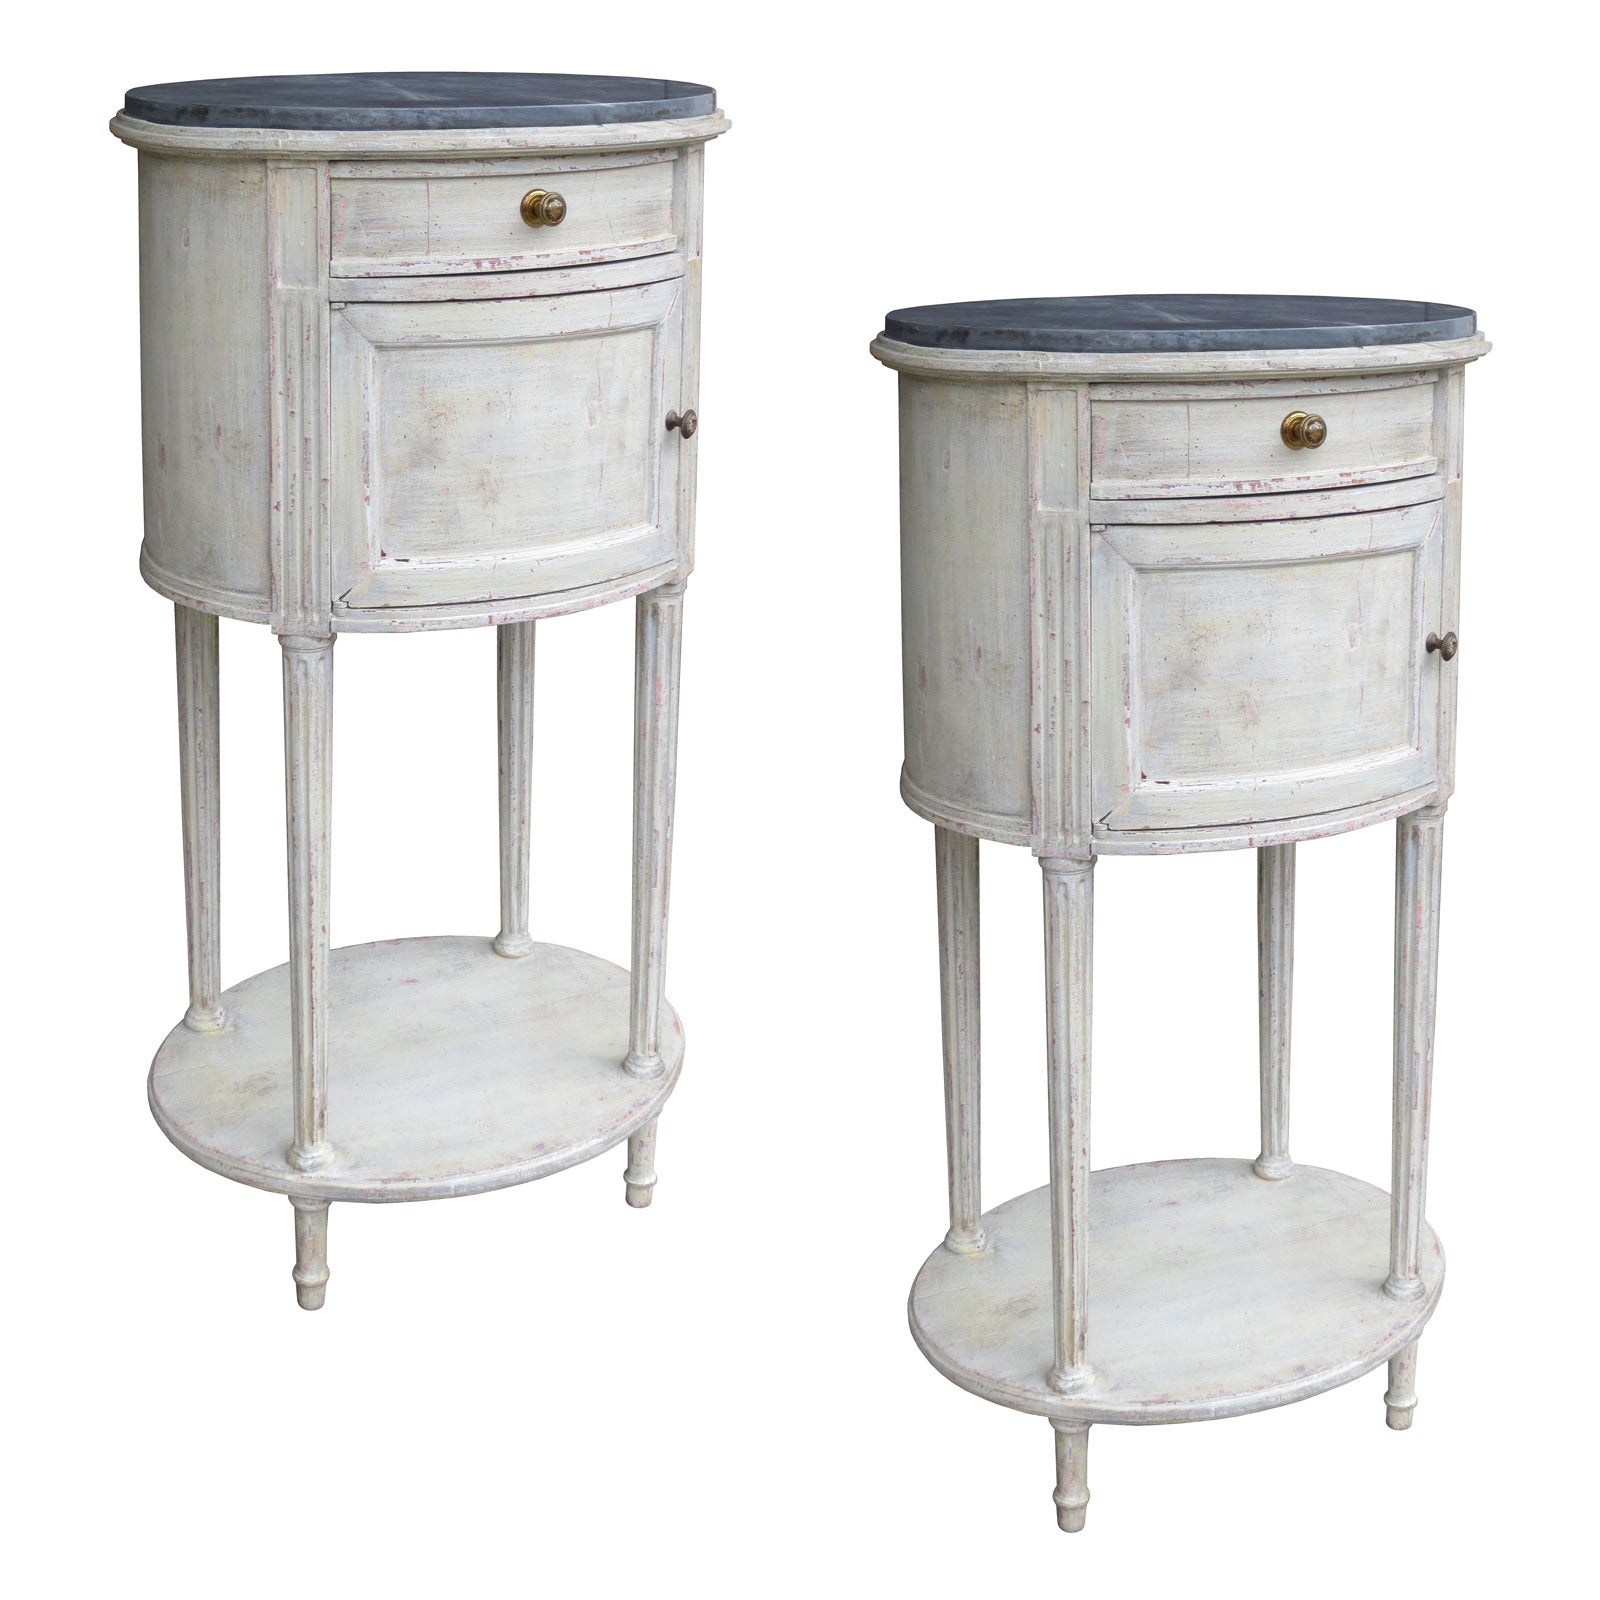 Pair of 19th/20th Century French Bedside Tables with Marble Tops & Interior